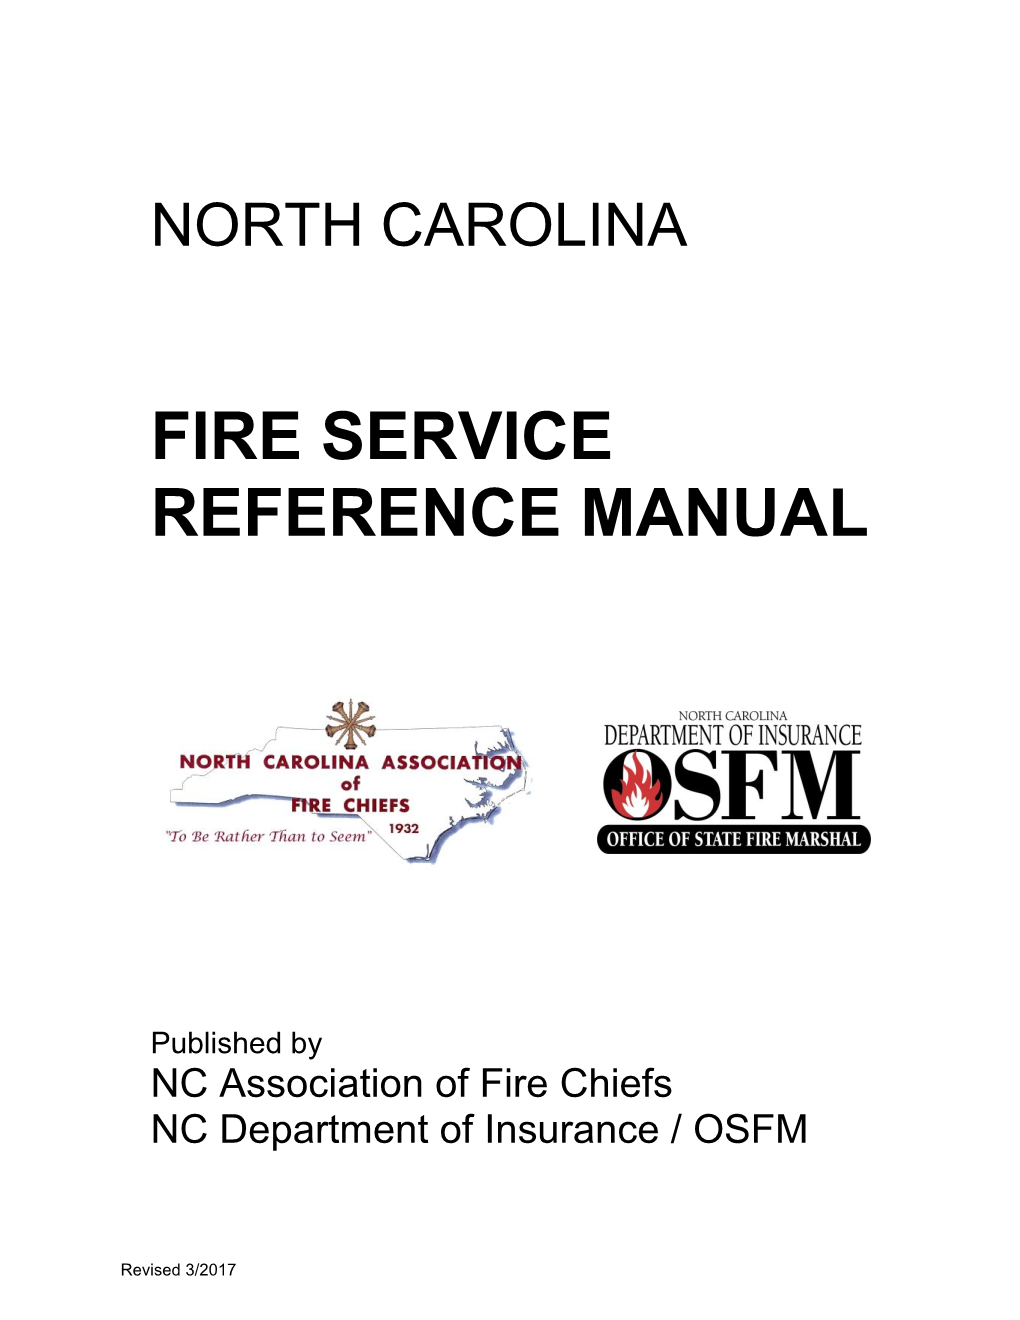 Fire Service Reference Manual